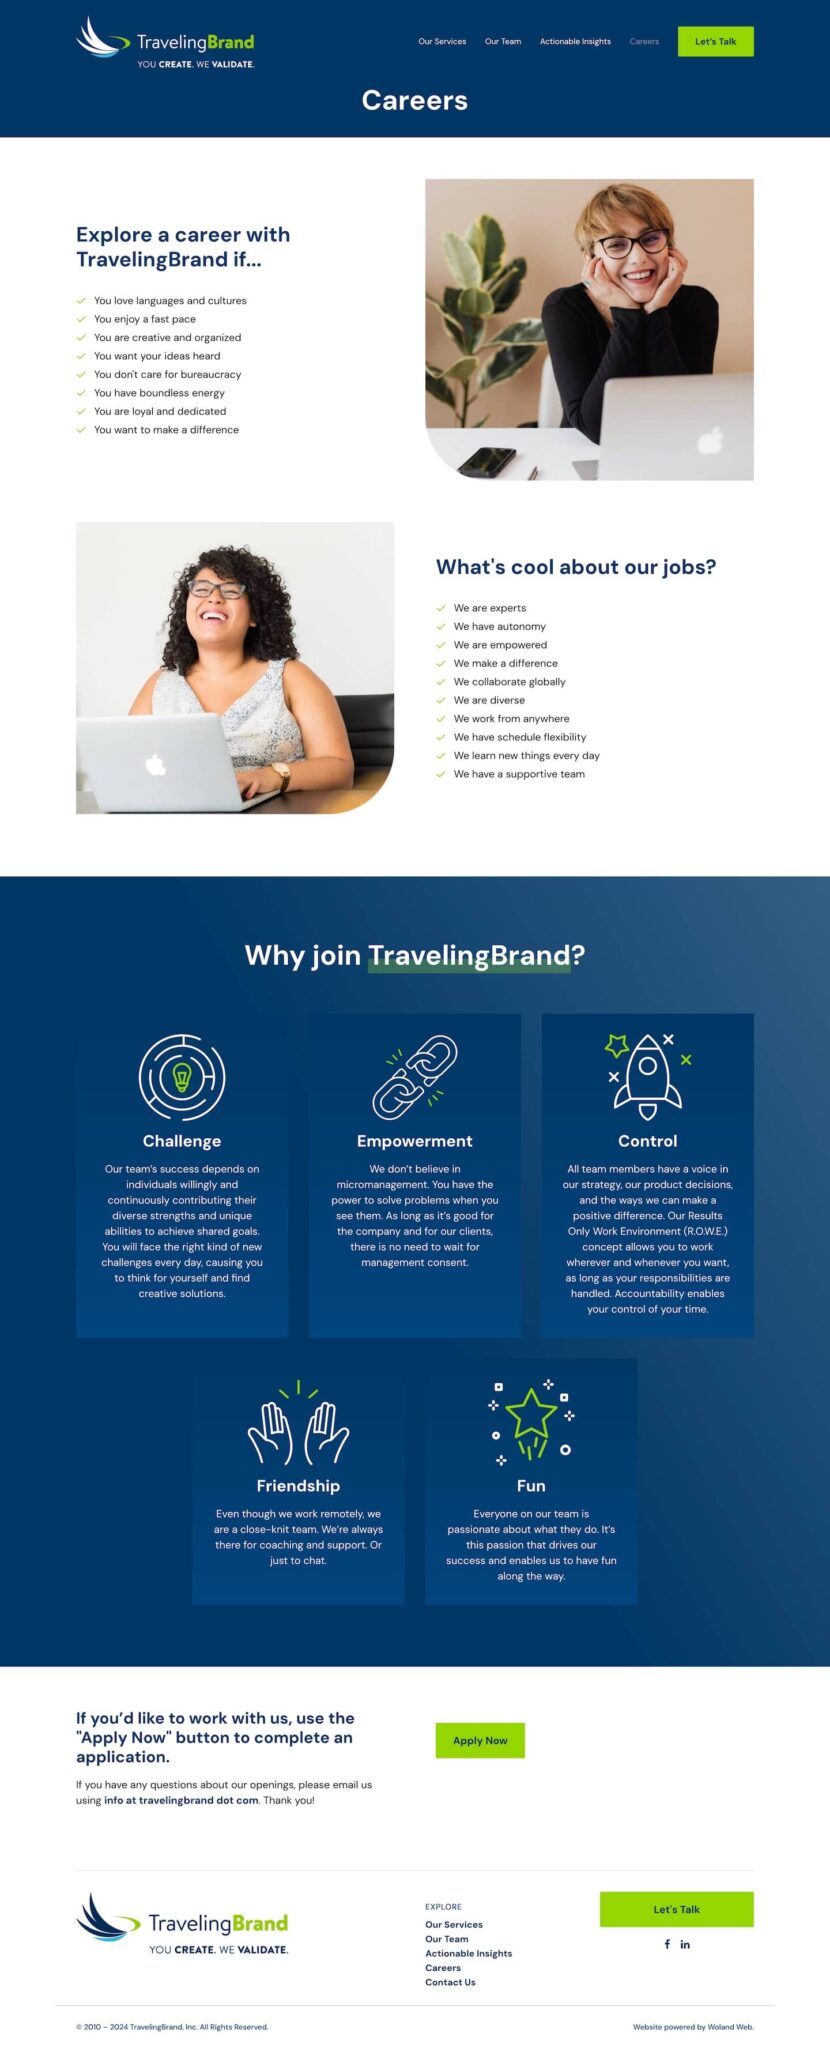 Traveling Brand website careers page